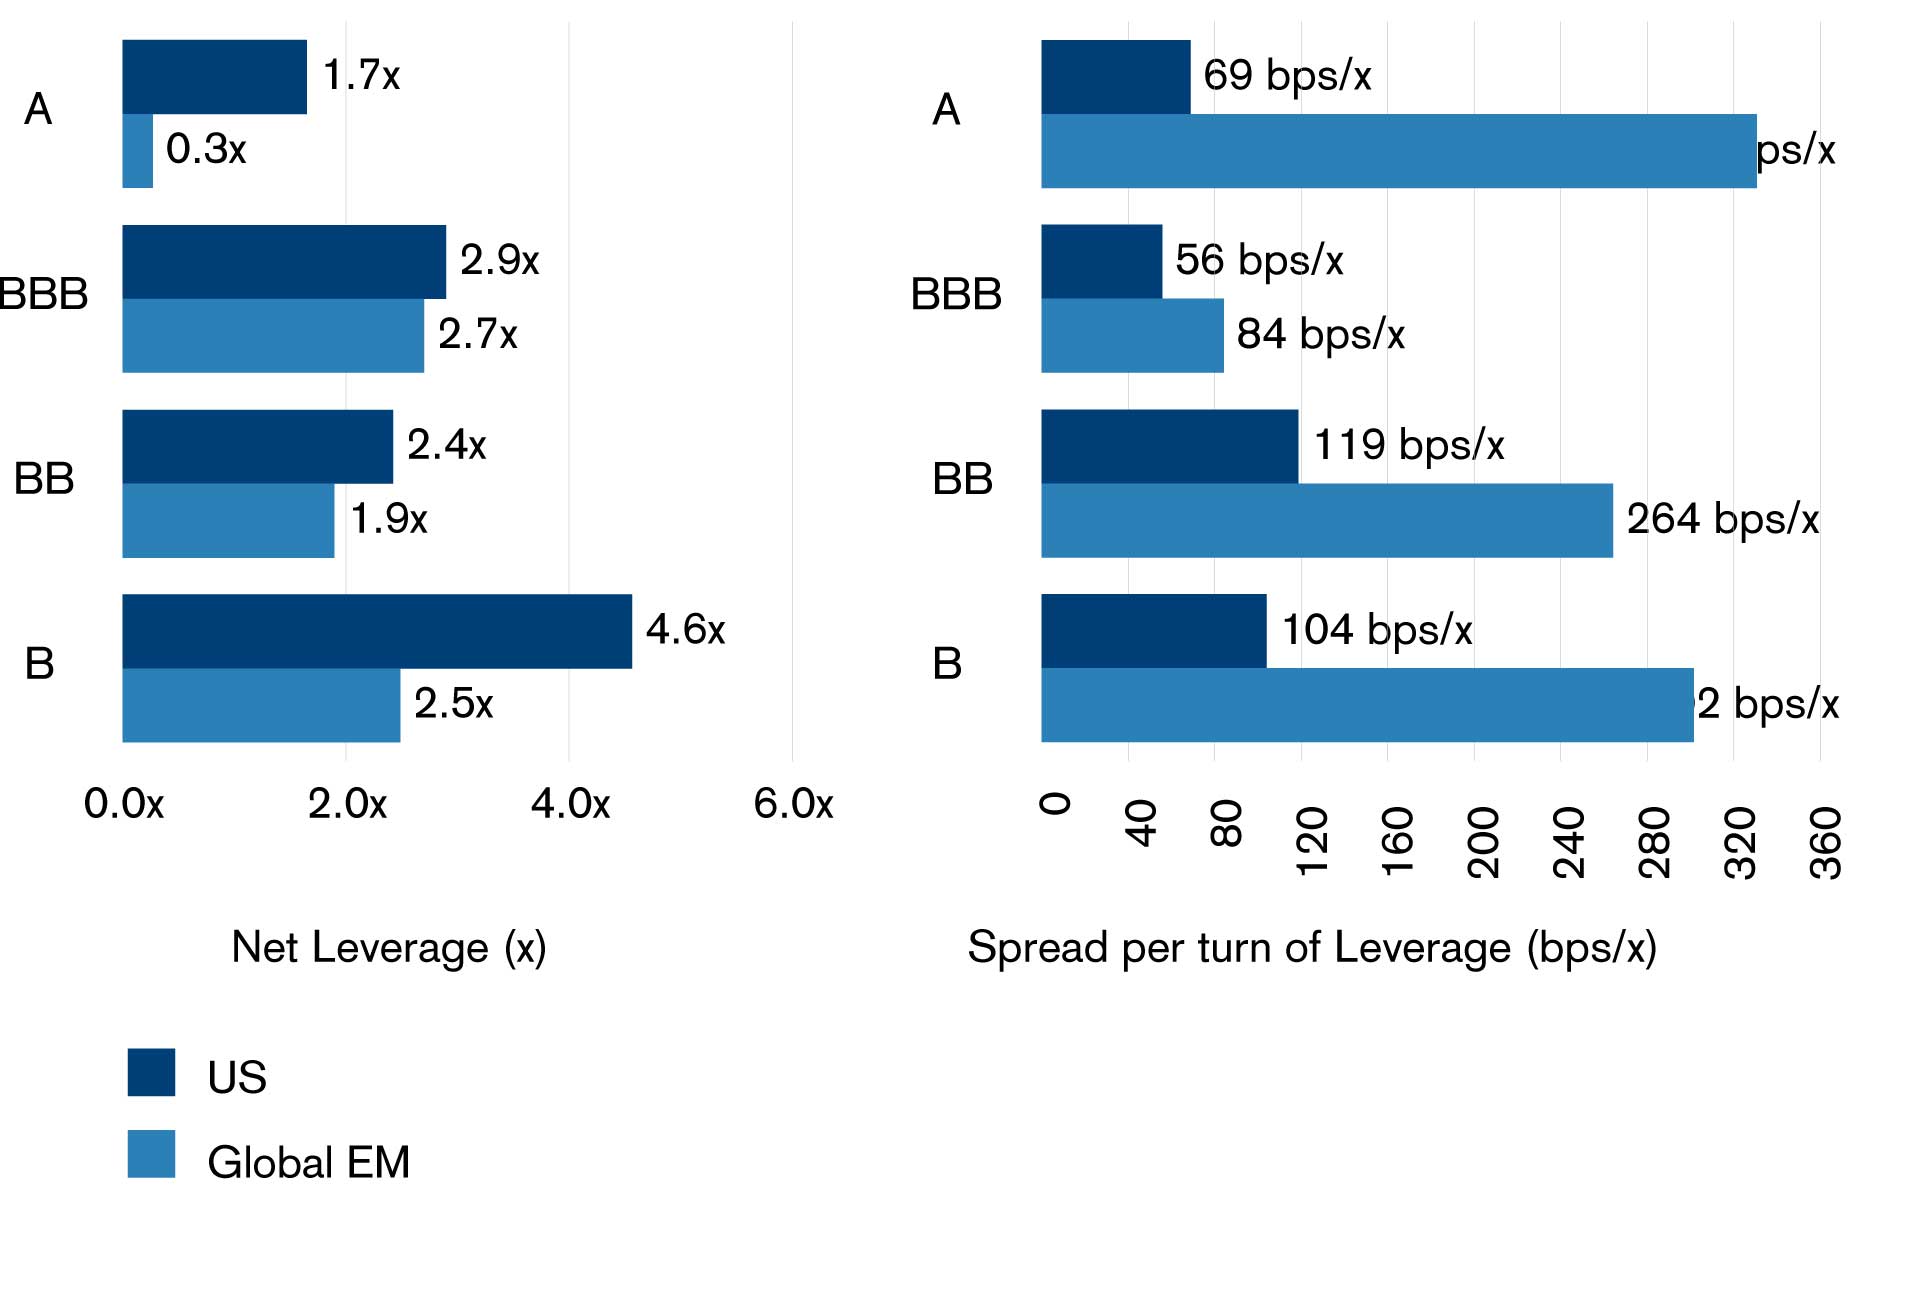 The chart below compares emerging-market and US corporates by looking at net leverage within the same rating buckets and reflects the much higher compensation for EM per unit of net leverage compared to the US.